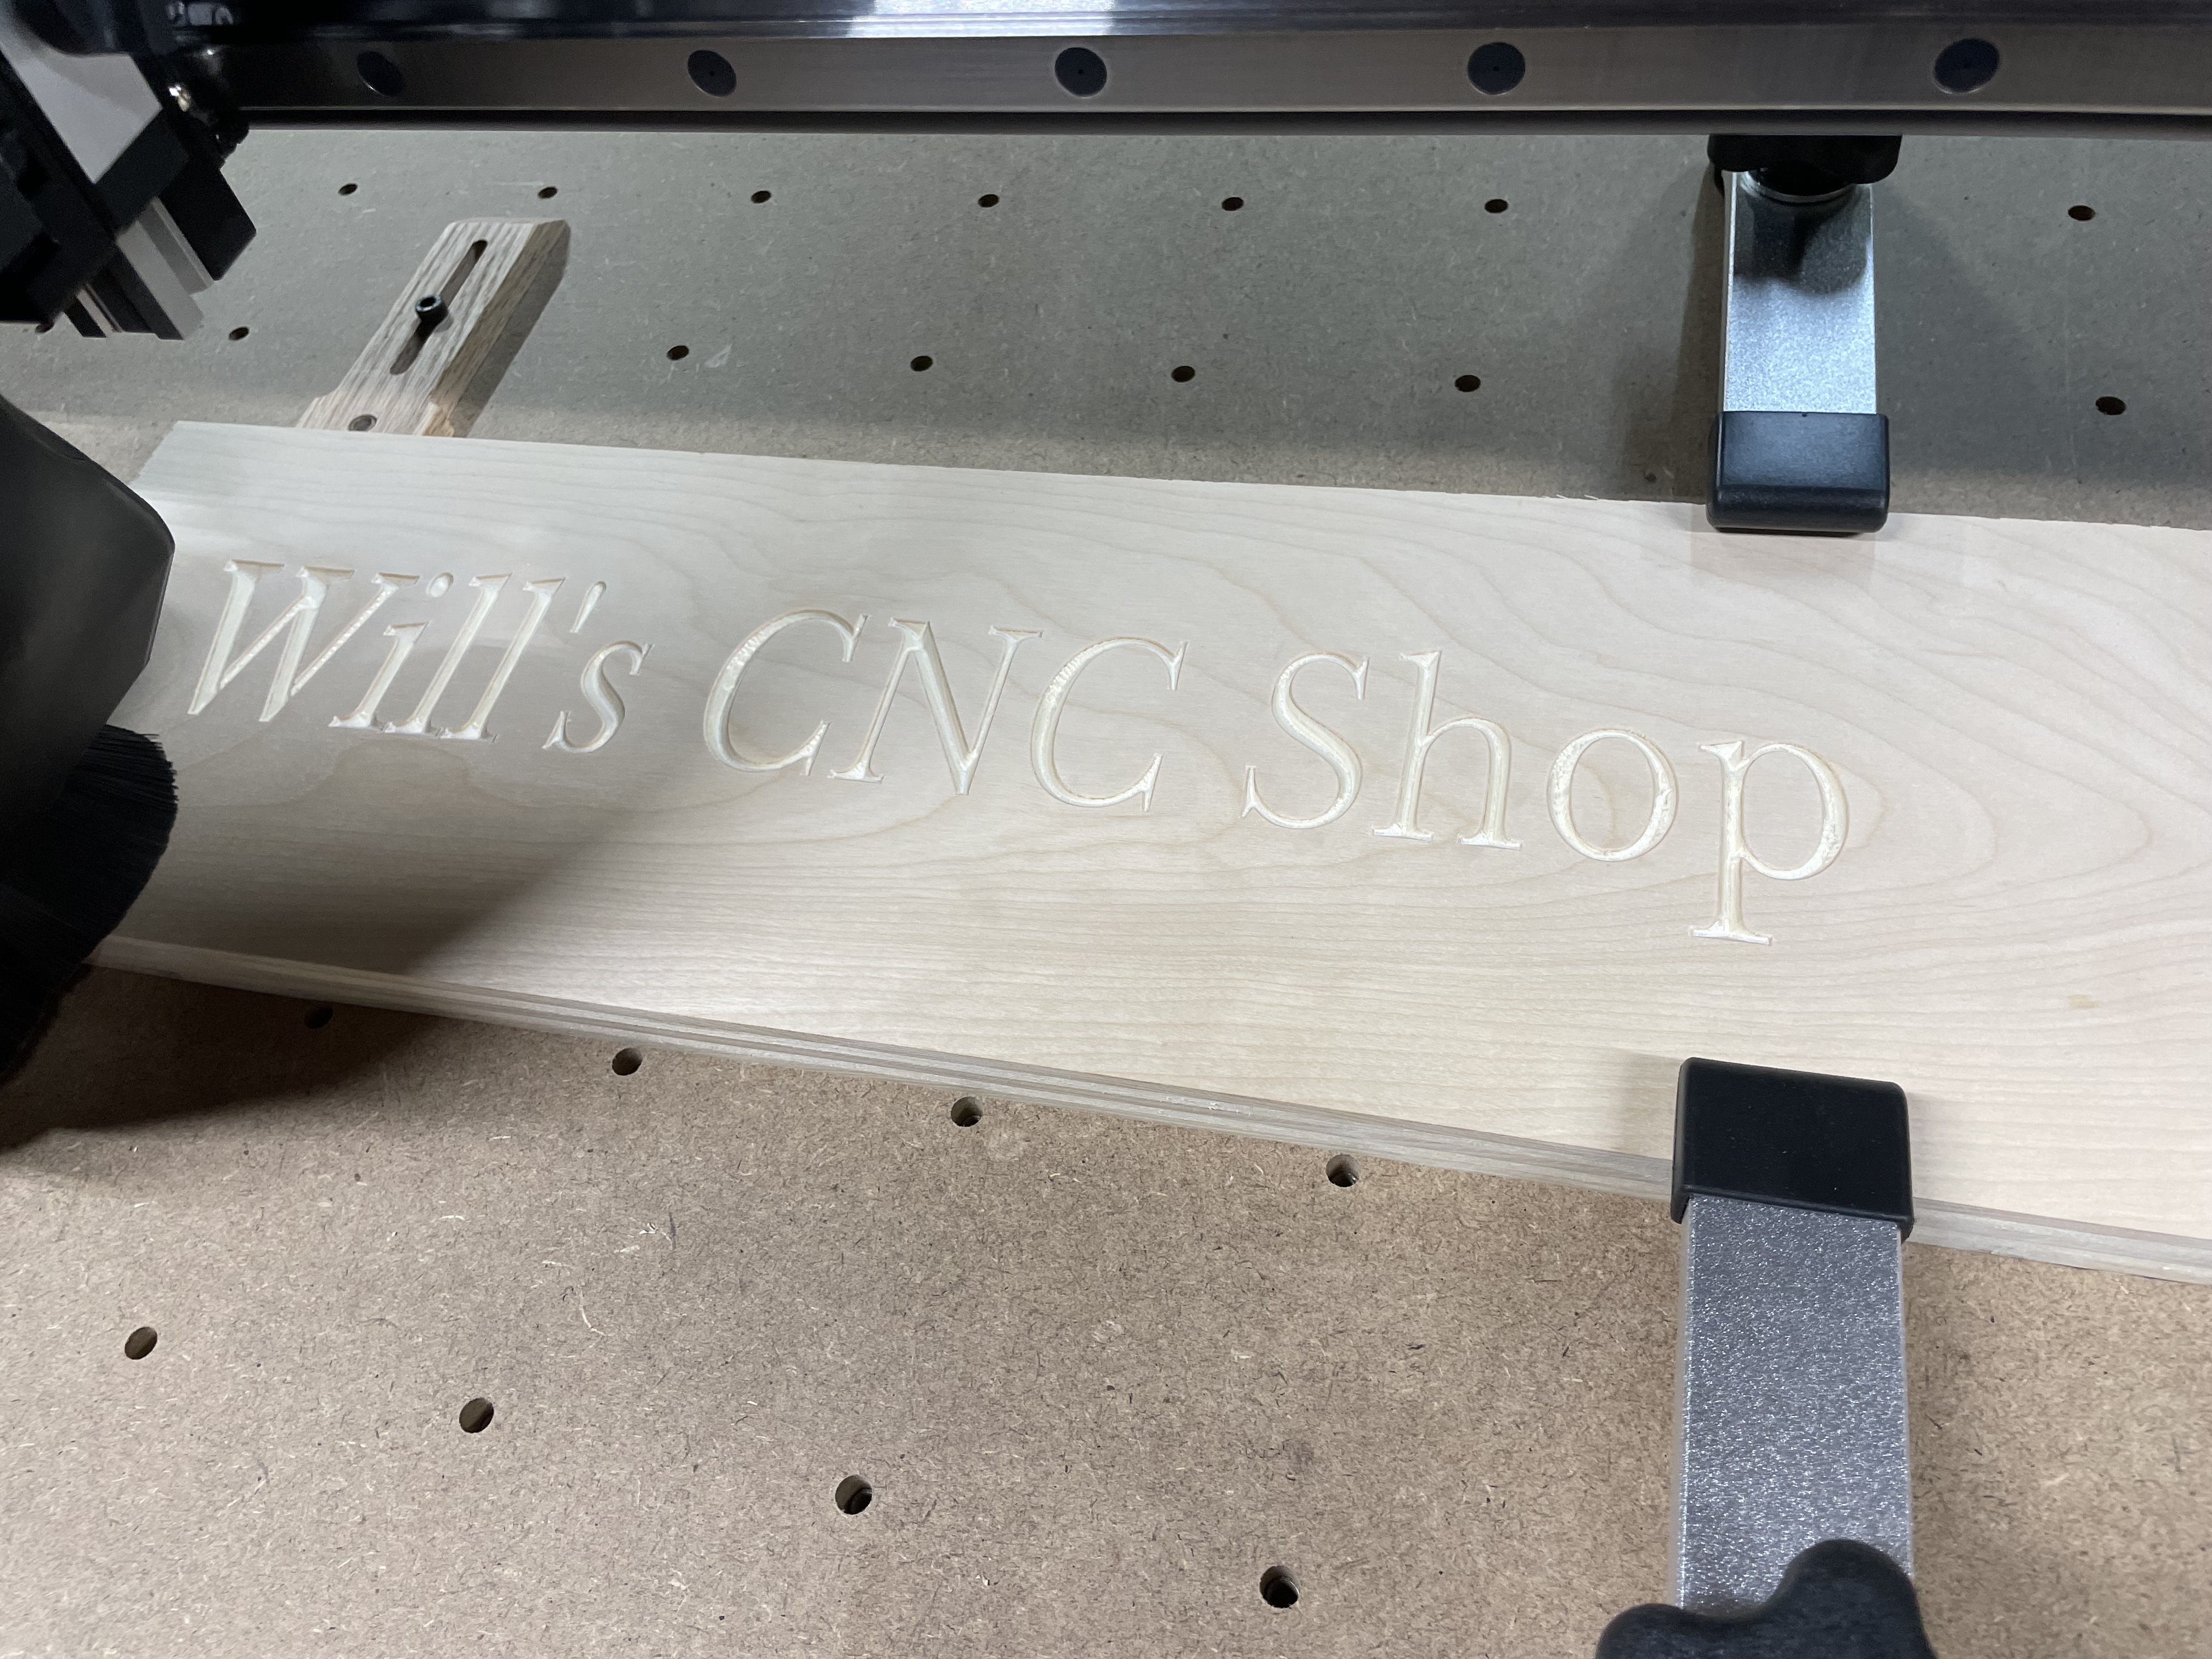 Finished first sign on X-Carve Pro